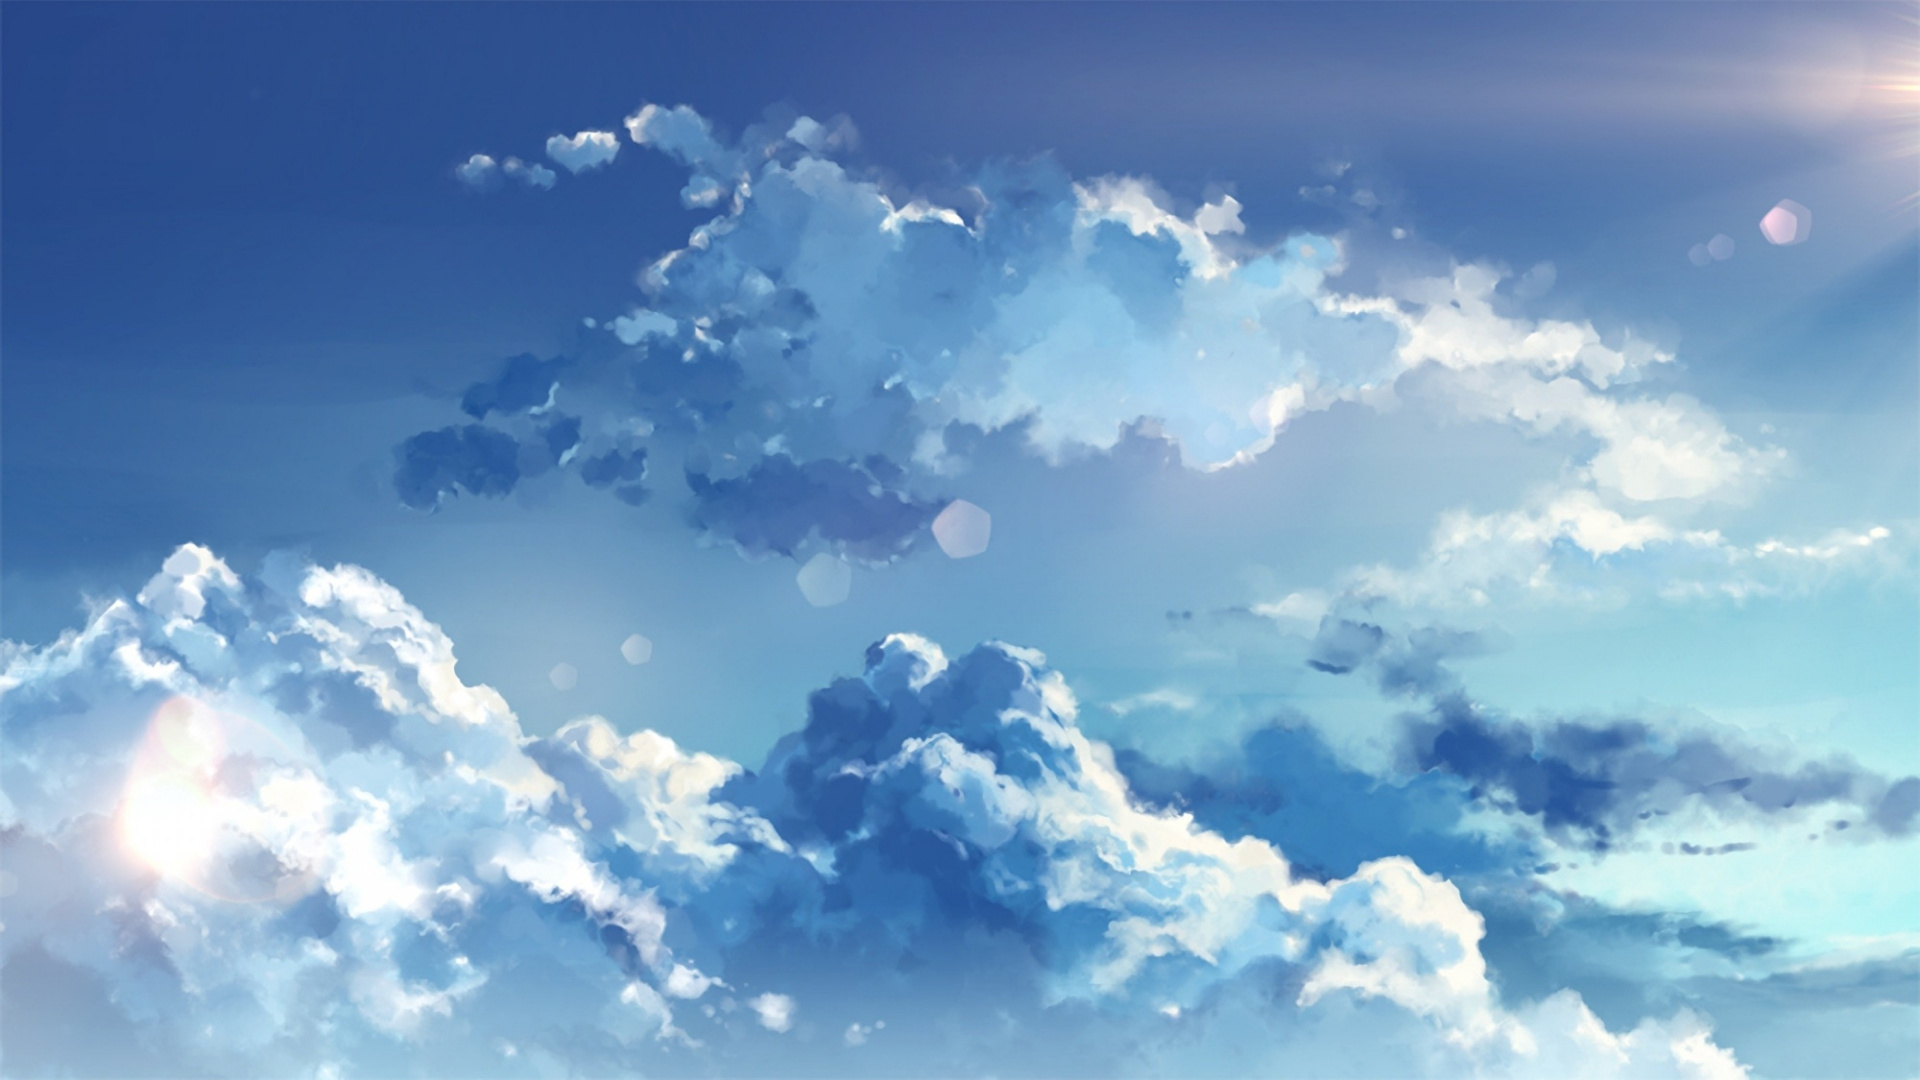 Anime Sky, Cloud, Anime, Atmosphere, Azure. Wallpaper in 1920x1080 Resolution